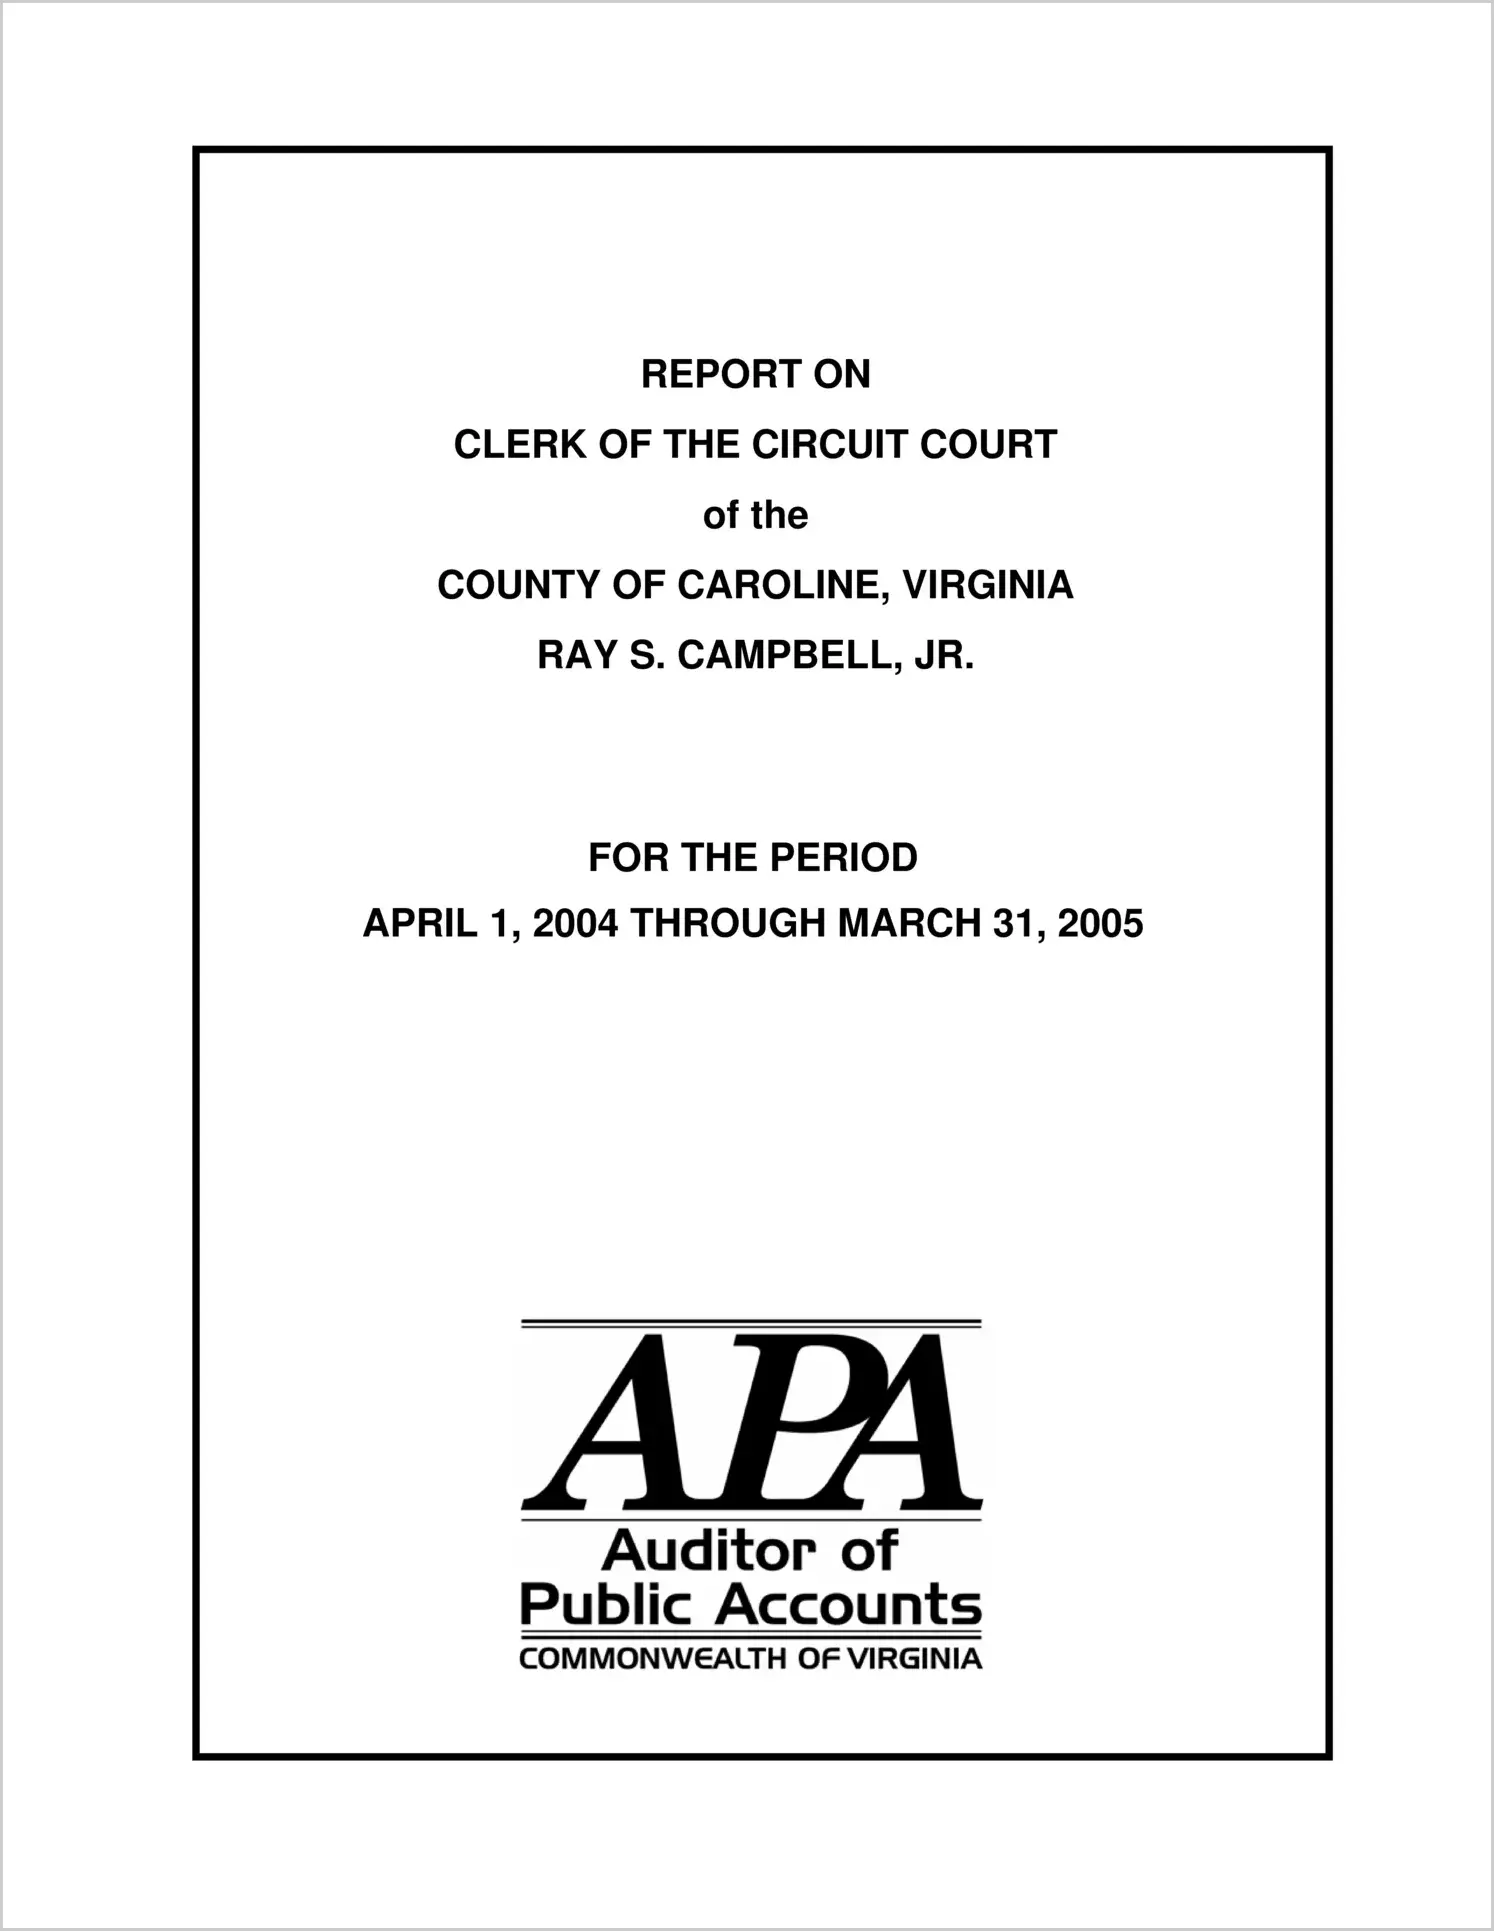 Clerk of the Circuit Court of the County of Caroline for the period April 1, 2004 through March 31, 2005